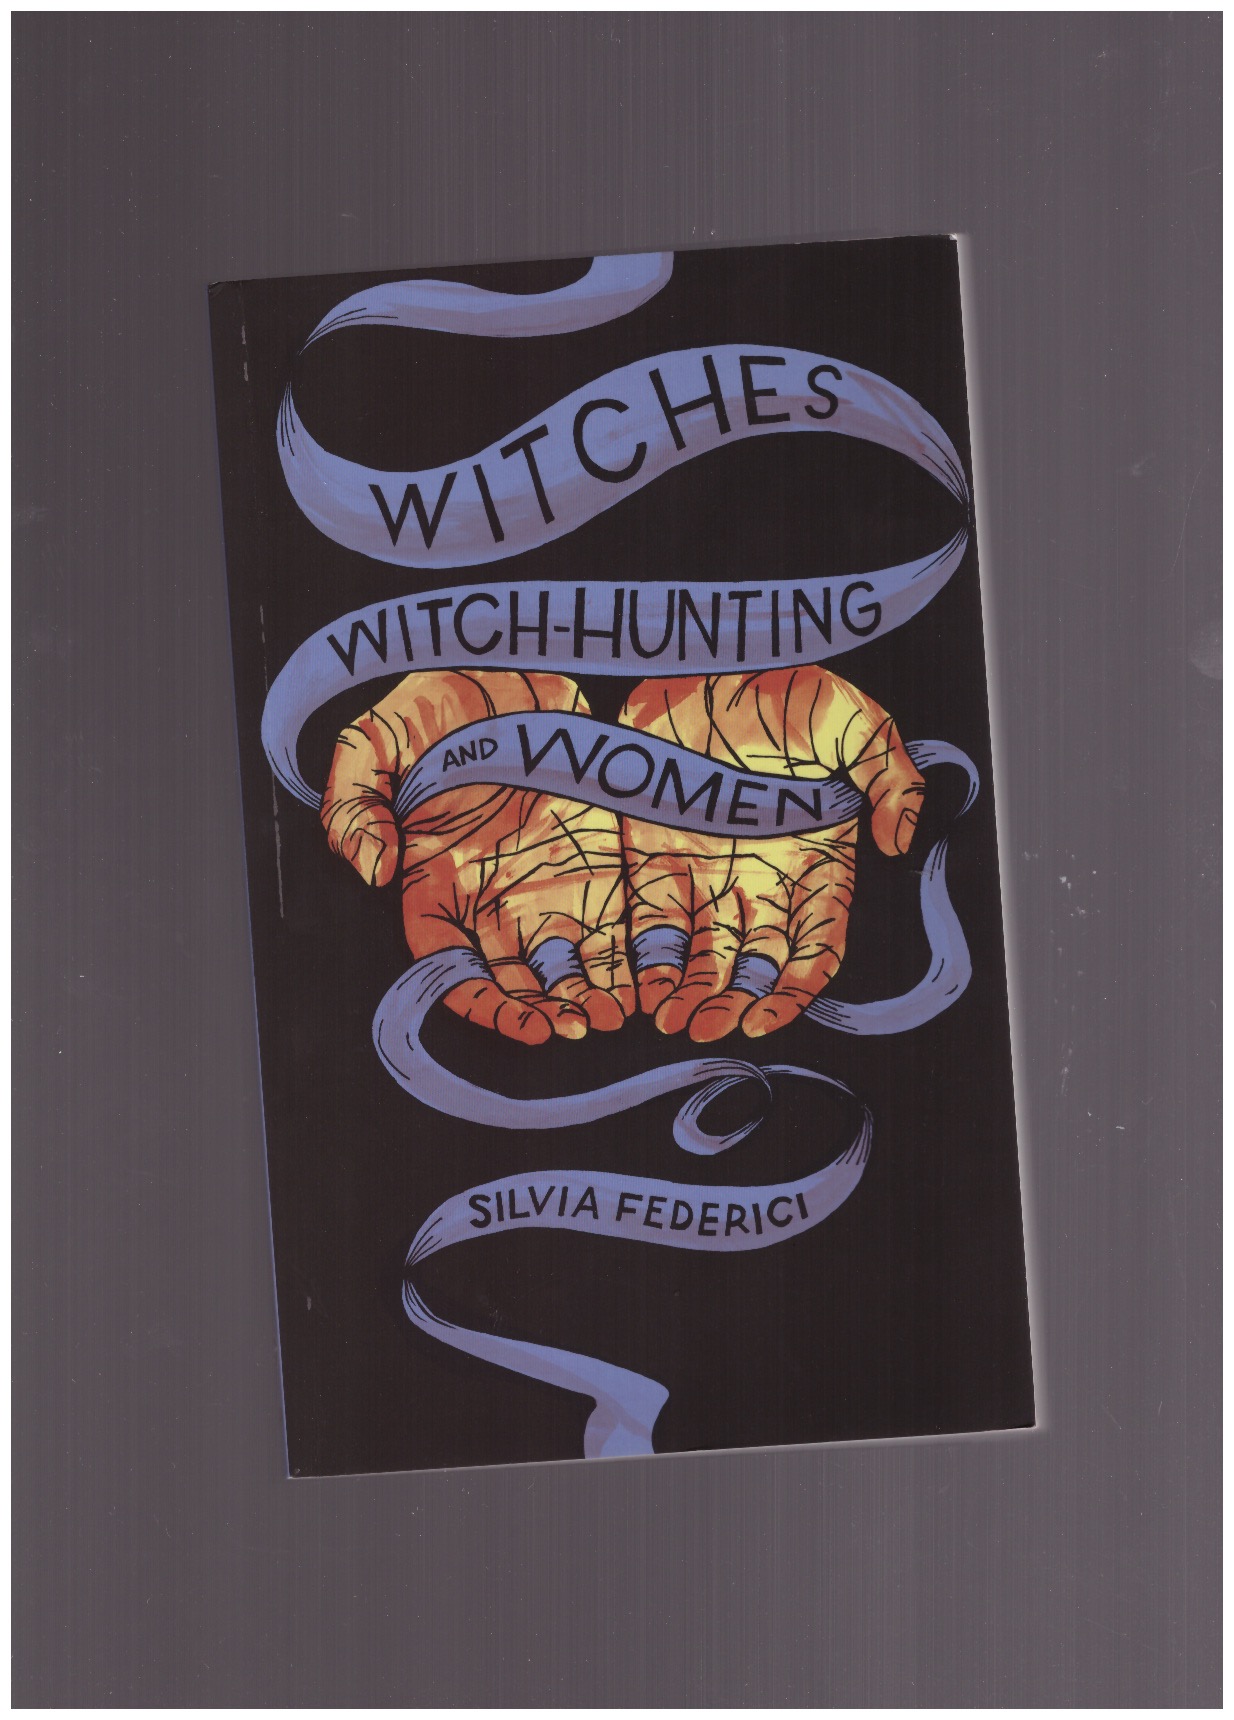 FEDERICI, Silvia - Witches, Witch-hunting and Women